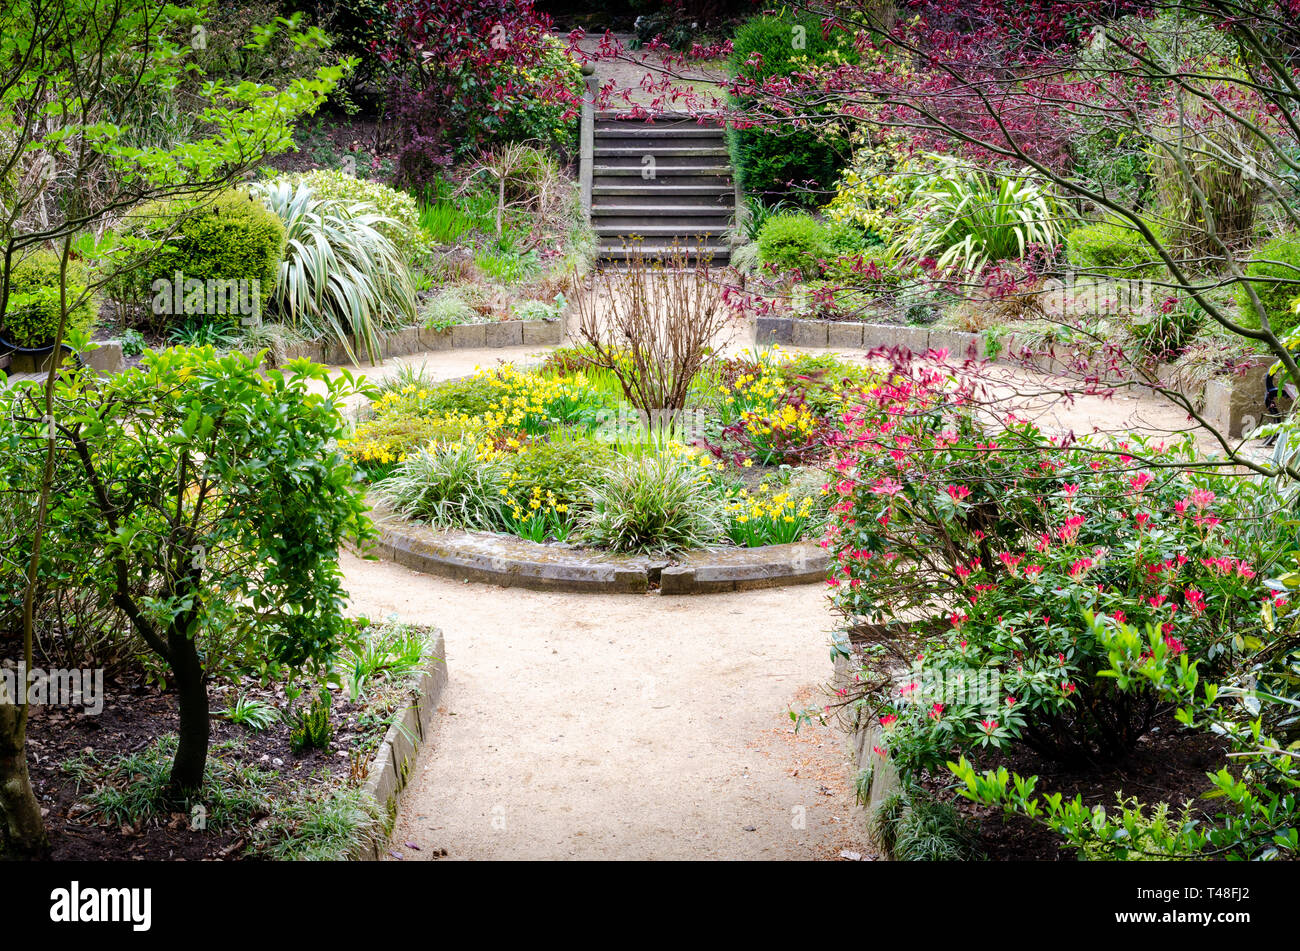 Denzell Gardens and House.  Built by Robert Scott, this house in Bowden, Altrincham features an ornamental pond, vines, orchids, and a sunken garden. Stock Photo